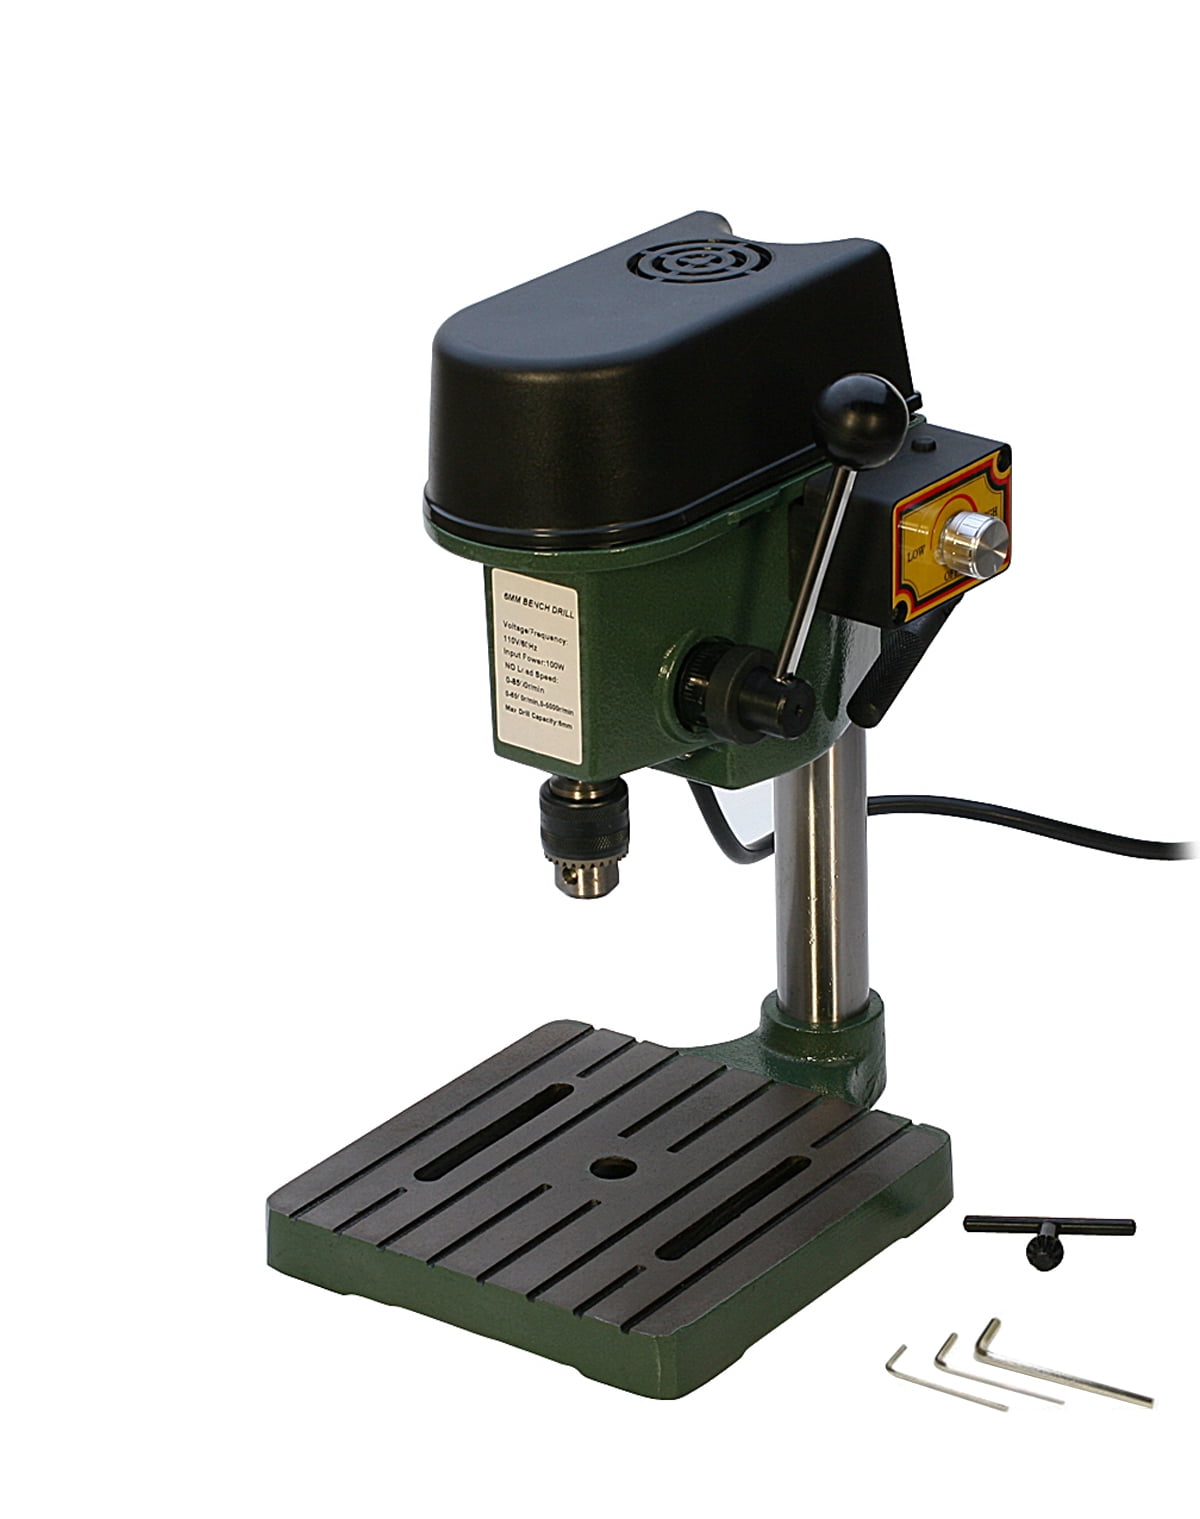 Bench Top Mini Drill Press 3 Speed for Wood or Metal Hobby Table Top FREE SHIP! 